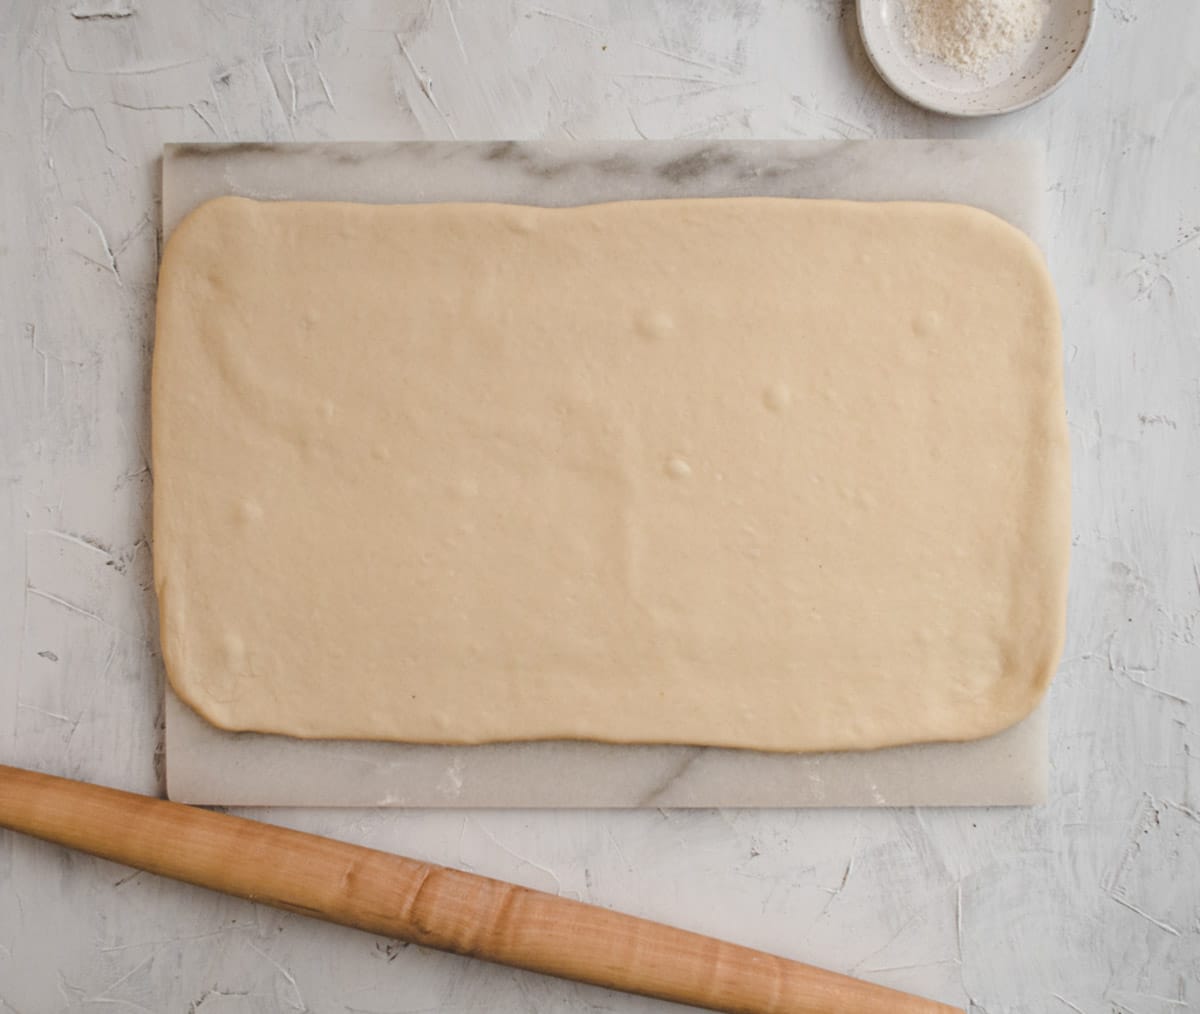 rolled out shaobing dough on a marble board with a small plate of flour and rolling pin.